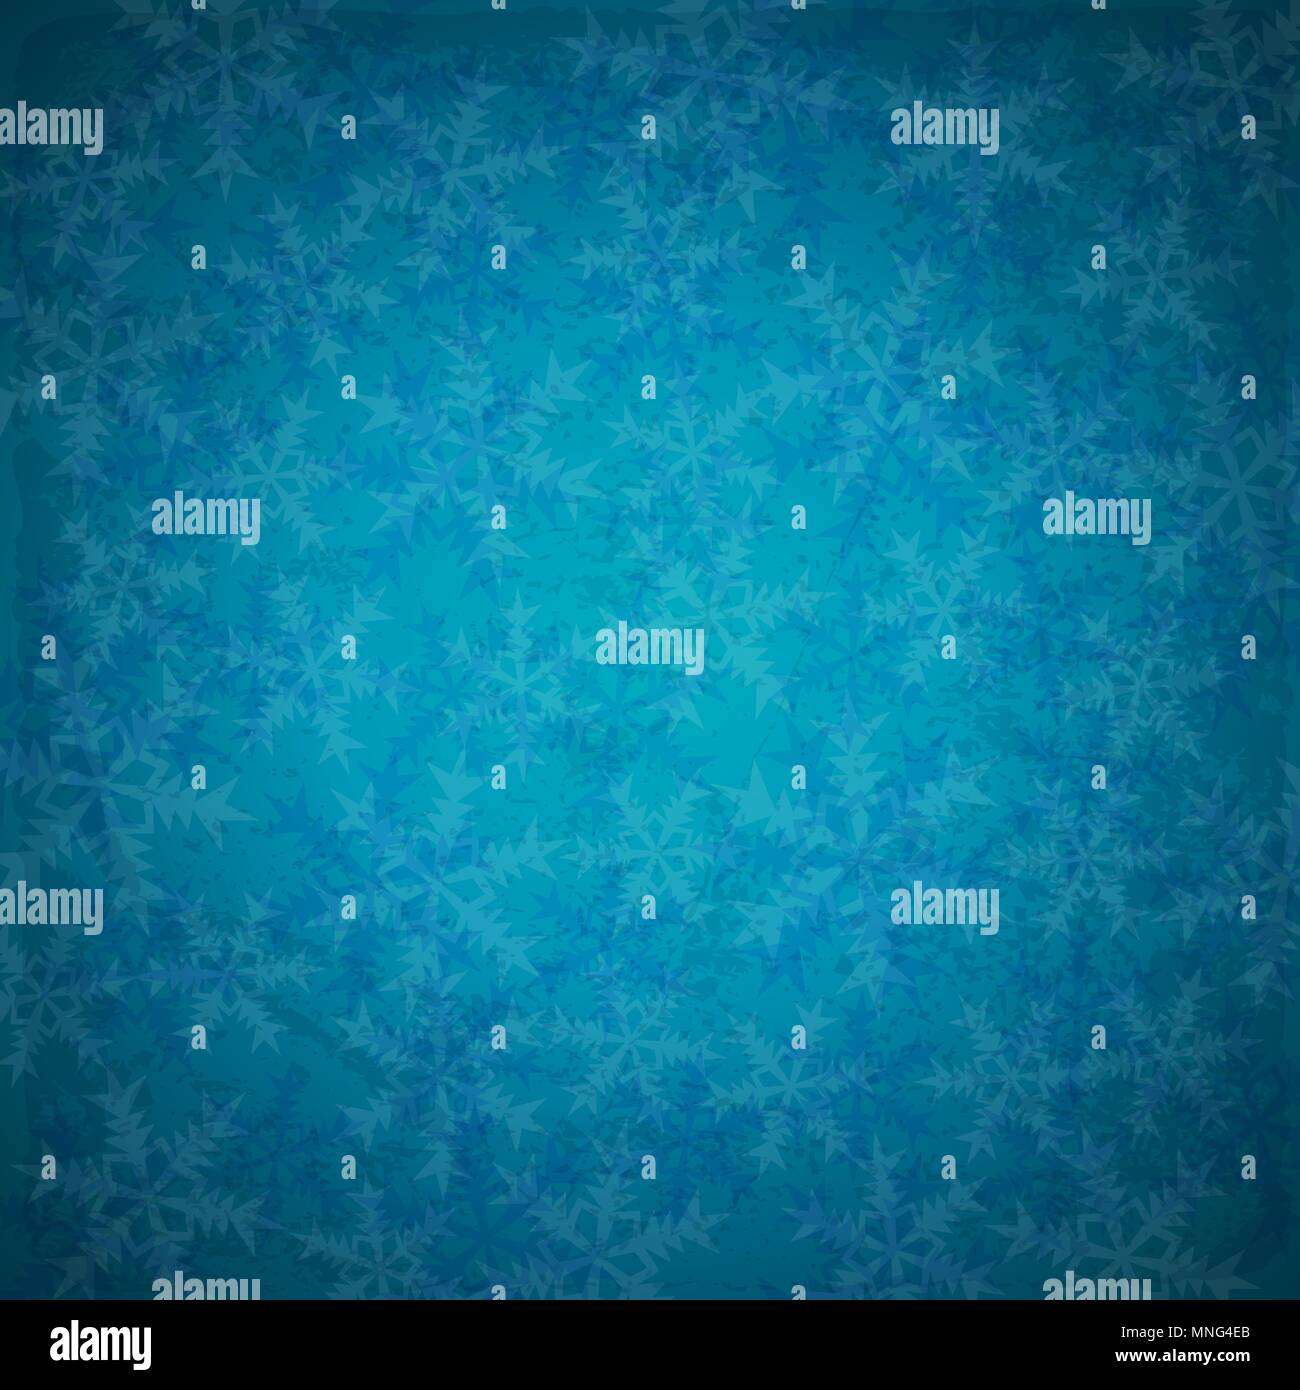 Blue abstract vector Christmas background with snowflakes in retro style Stock Vector